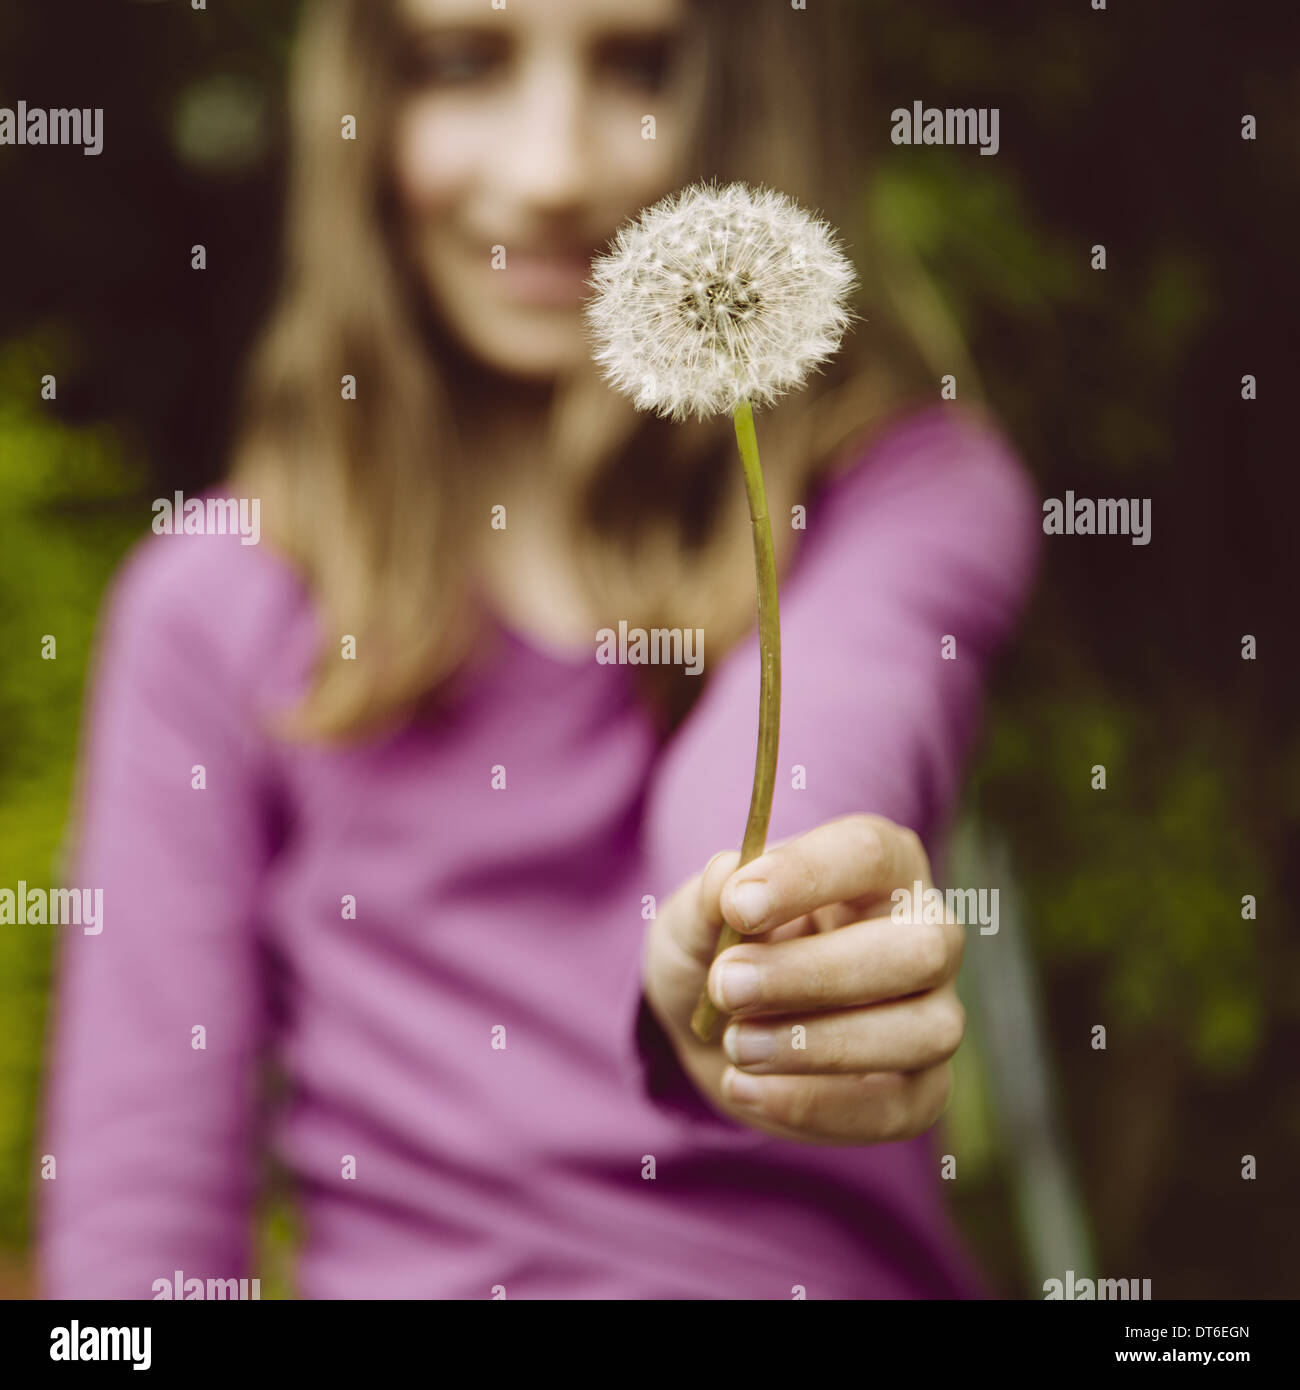 A ten year old girl holding a dandelion clock seedhead on a long stem. Stock Photo